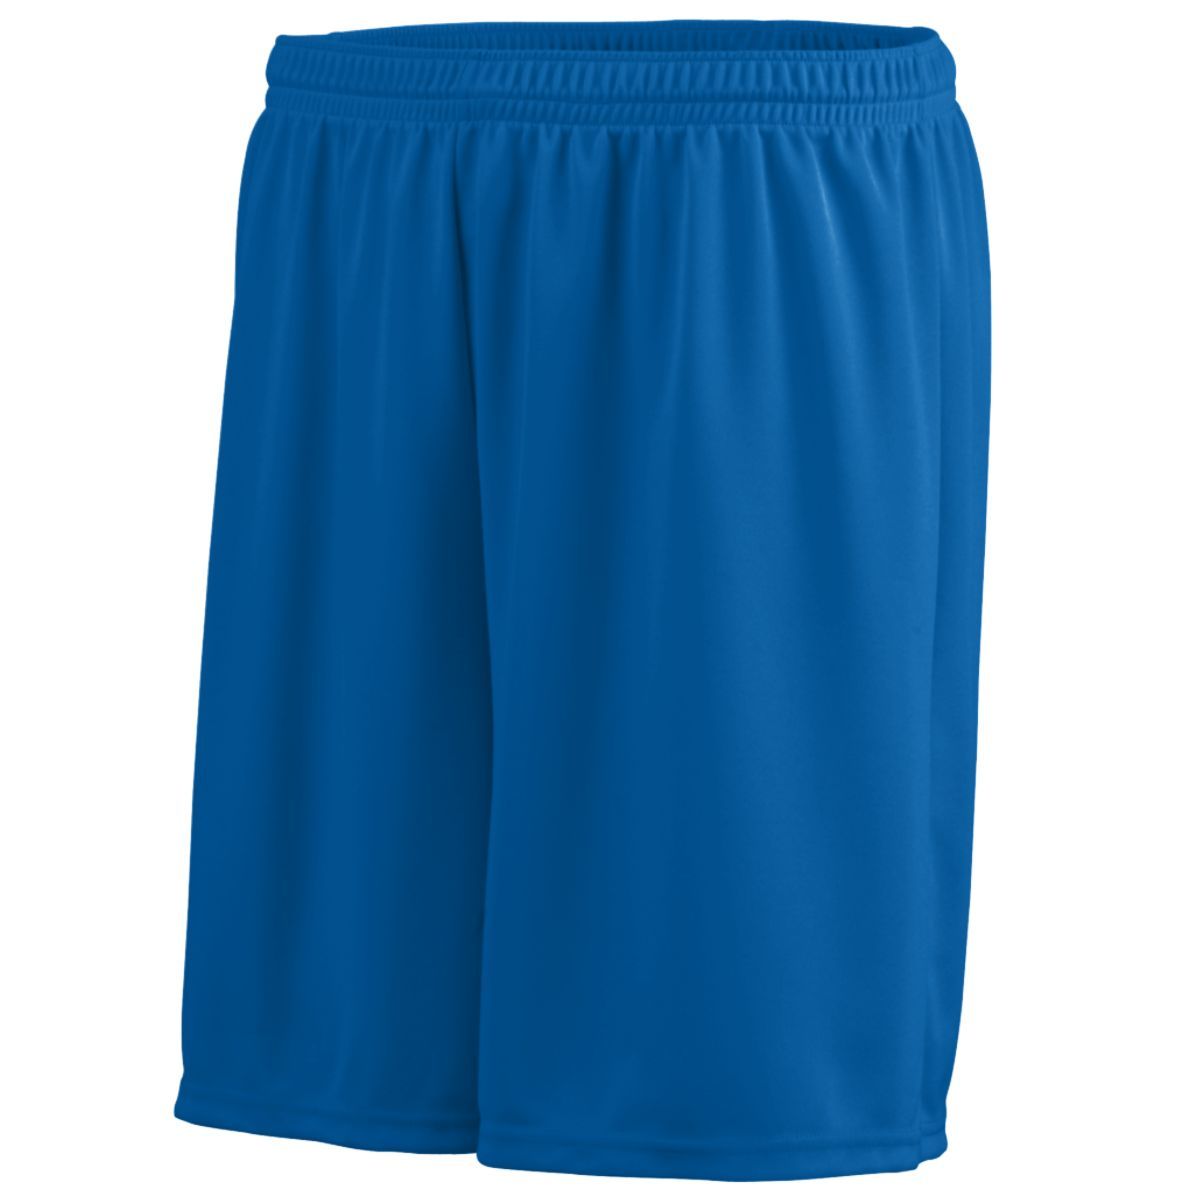 Augusta Sportswear Octane Shorts in Royal  -Part of the Adult, Adult-Shorts, Augusta-Products product lines at KanaleyCreations.com